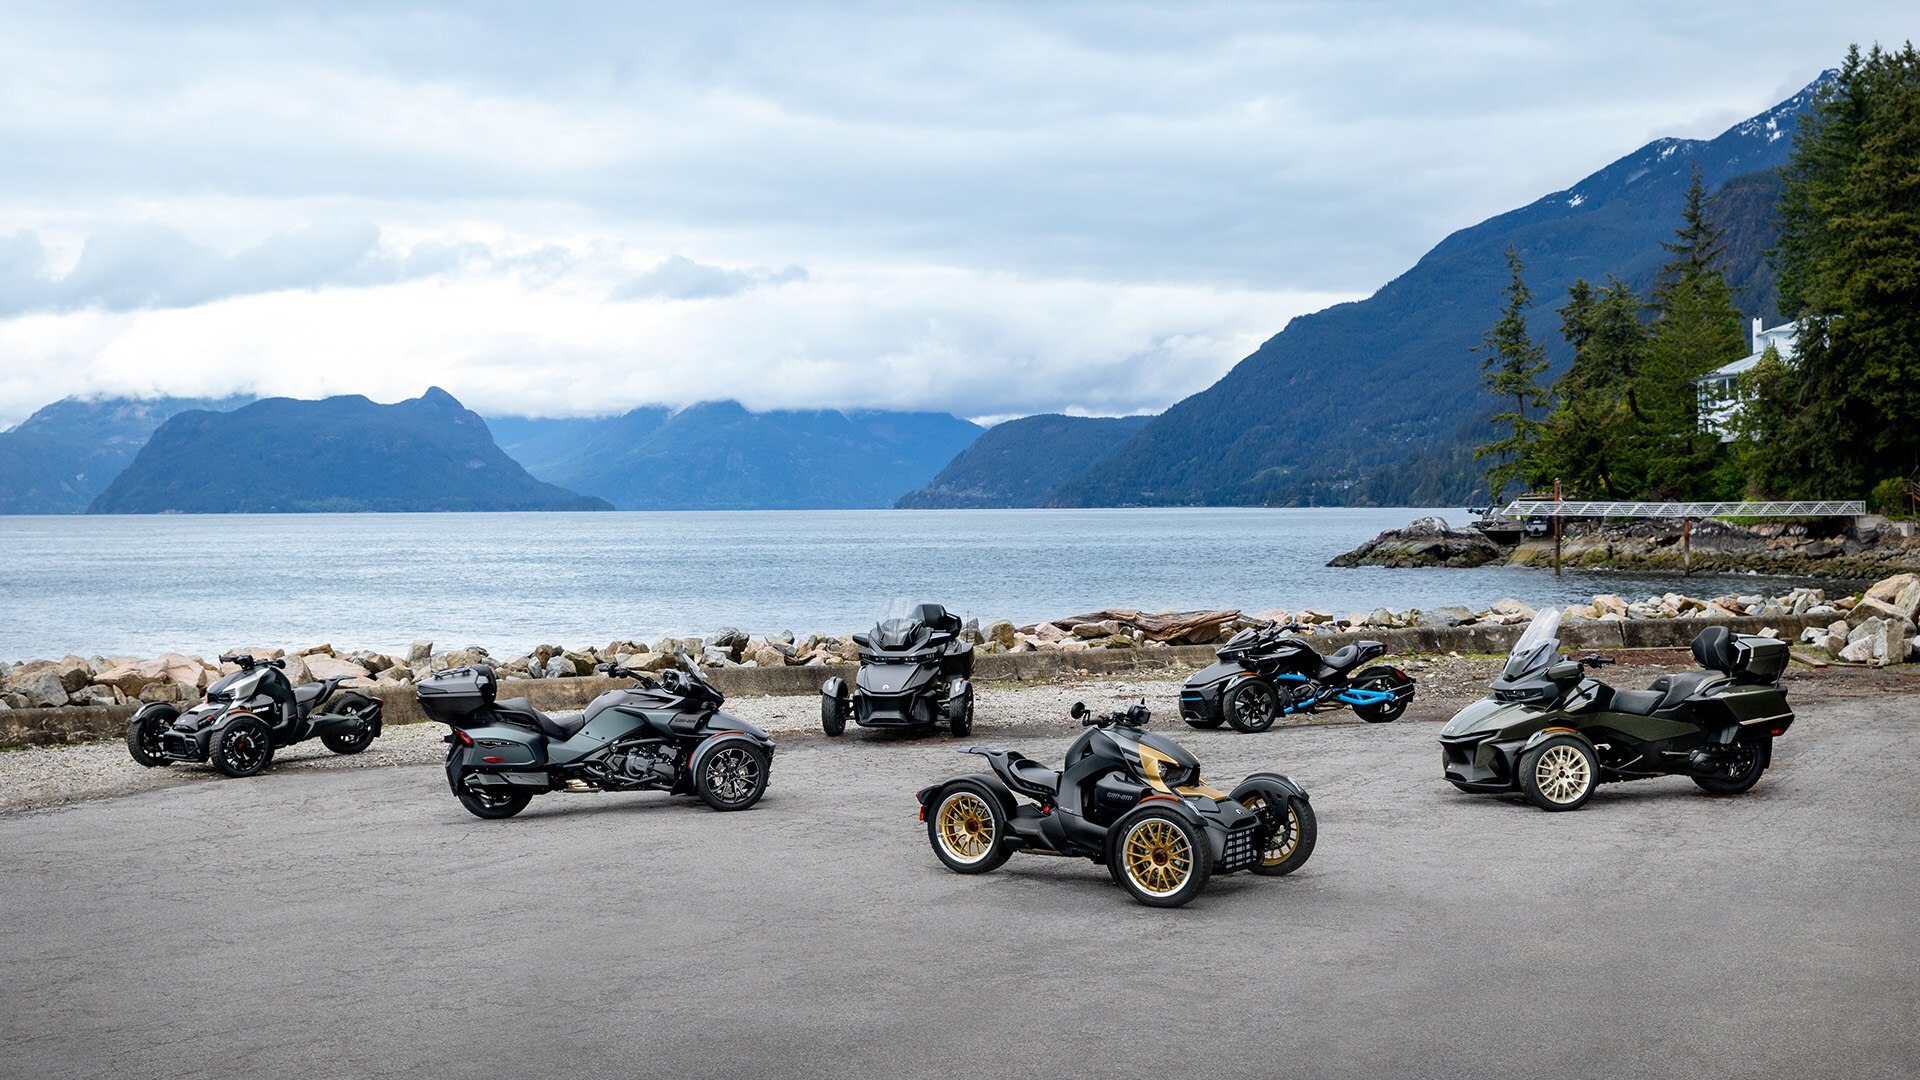 2023 Can-Am Ryker, Spyder and Spyder RT models with a view on the lake and moutains